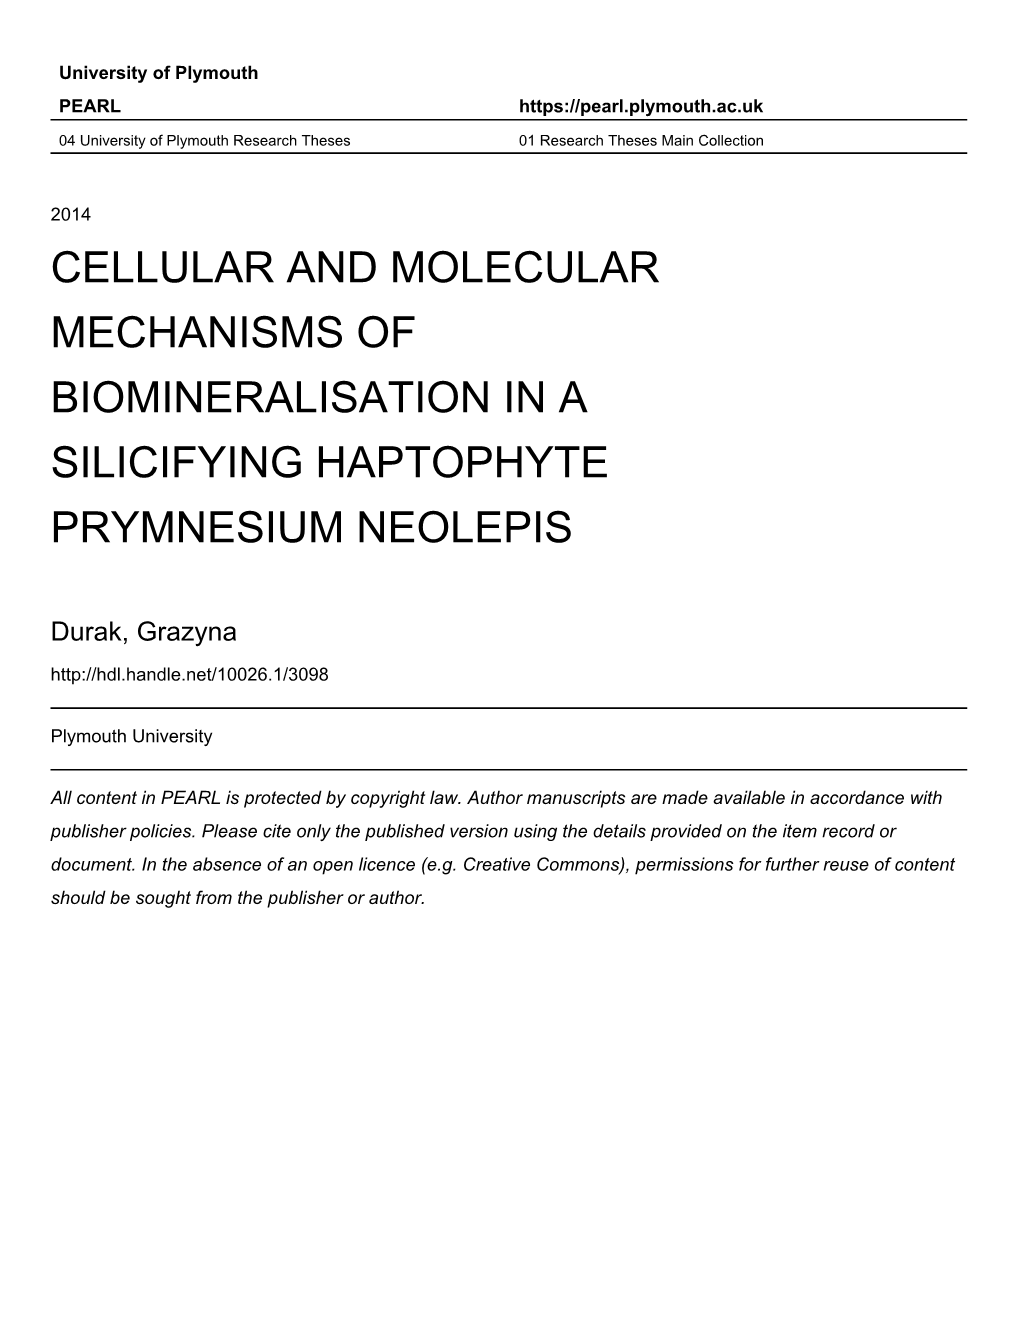 Cellular and Molecular Mechanisms of Biomineralisation in a Silicifying Haptophyte Prymnesium Neolepis